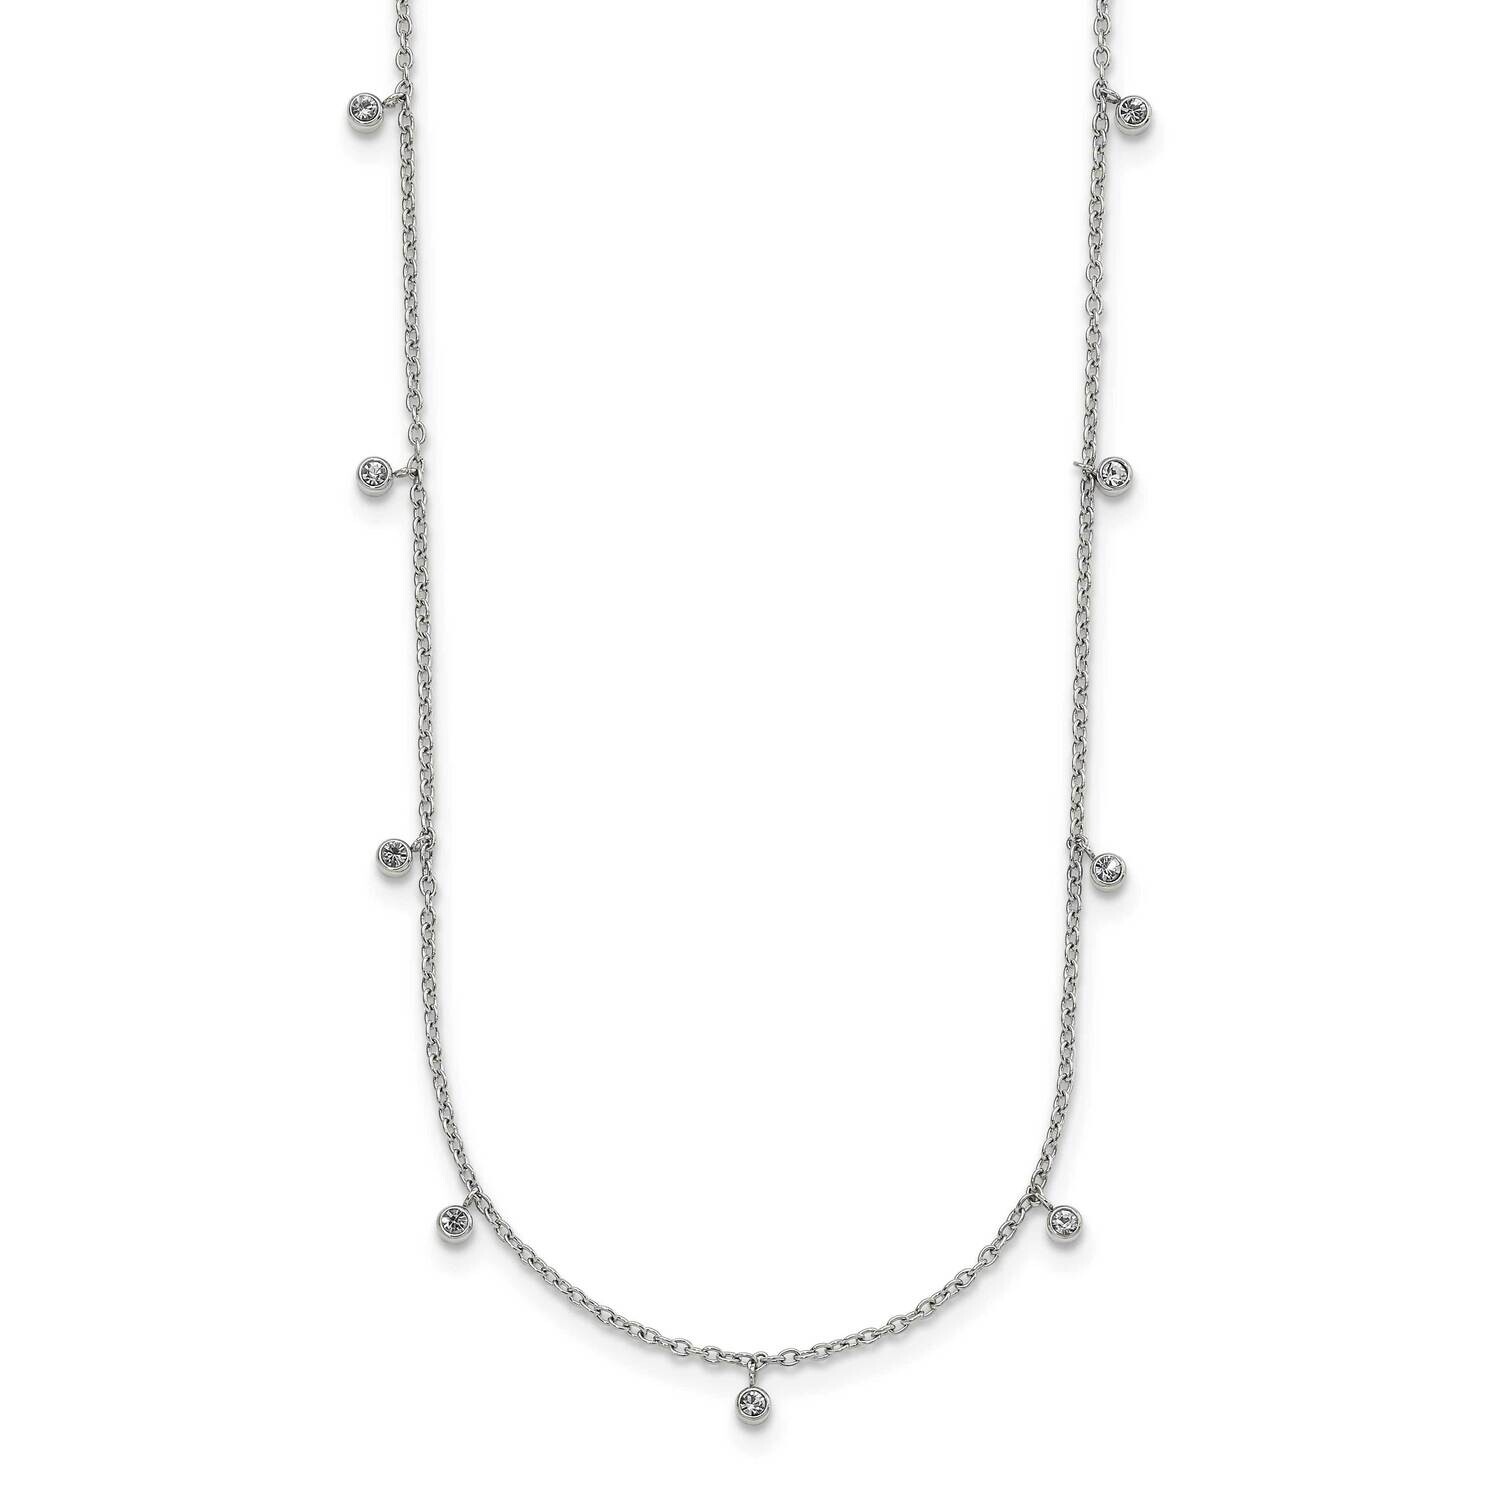 Chisel Polished Clear Crystal 17.5 Inch 2 Inch Extension Necklace Stainless Steel SRN3087-17.5